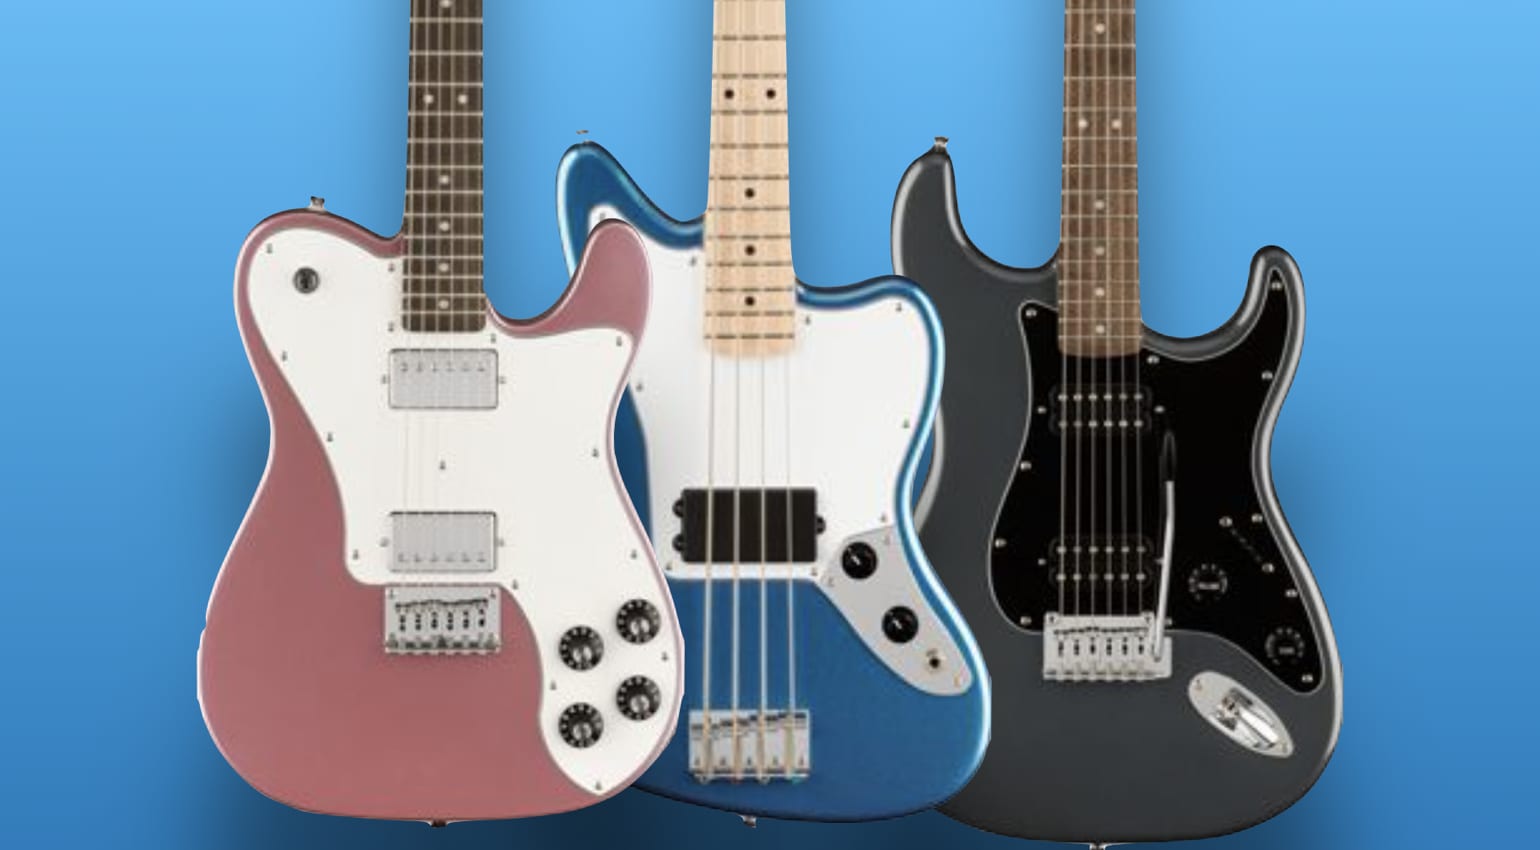 Fender intros new Squier Affinity Telecaster Deluxe, Stratocaster 